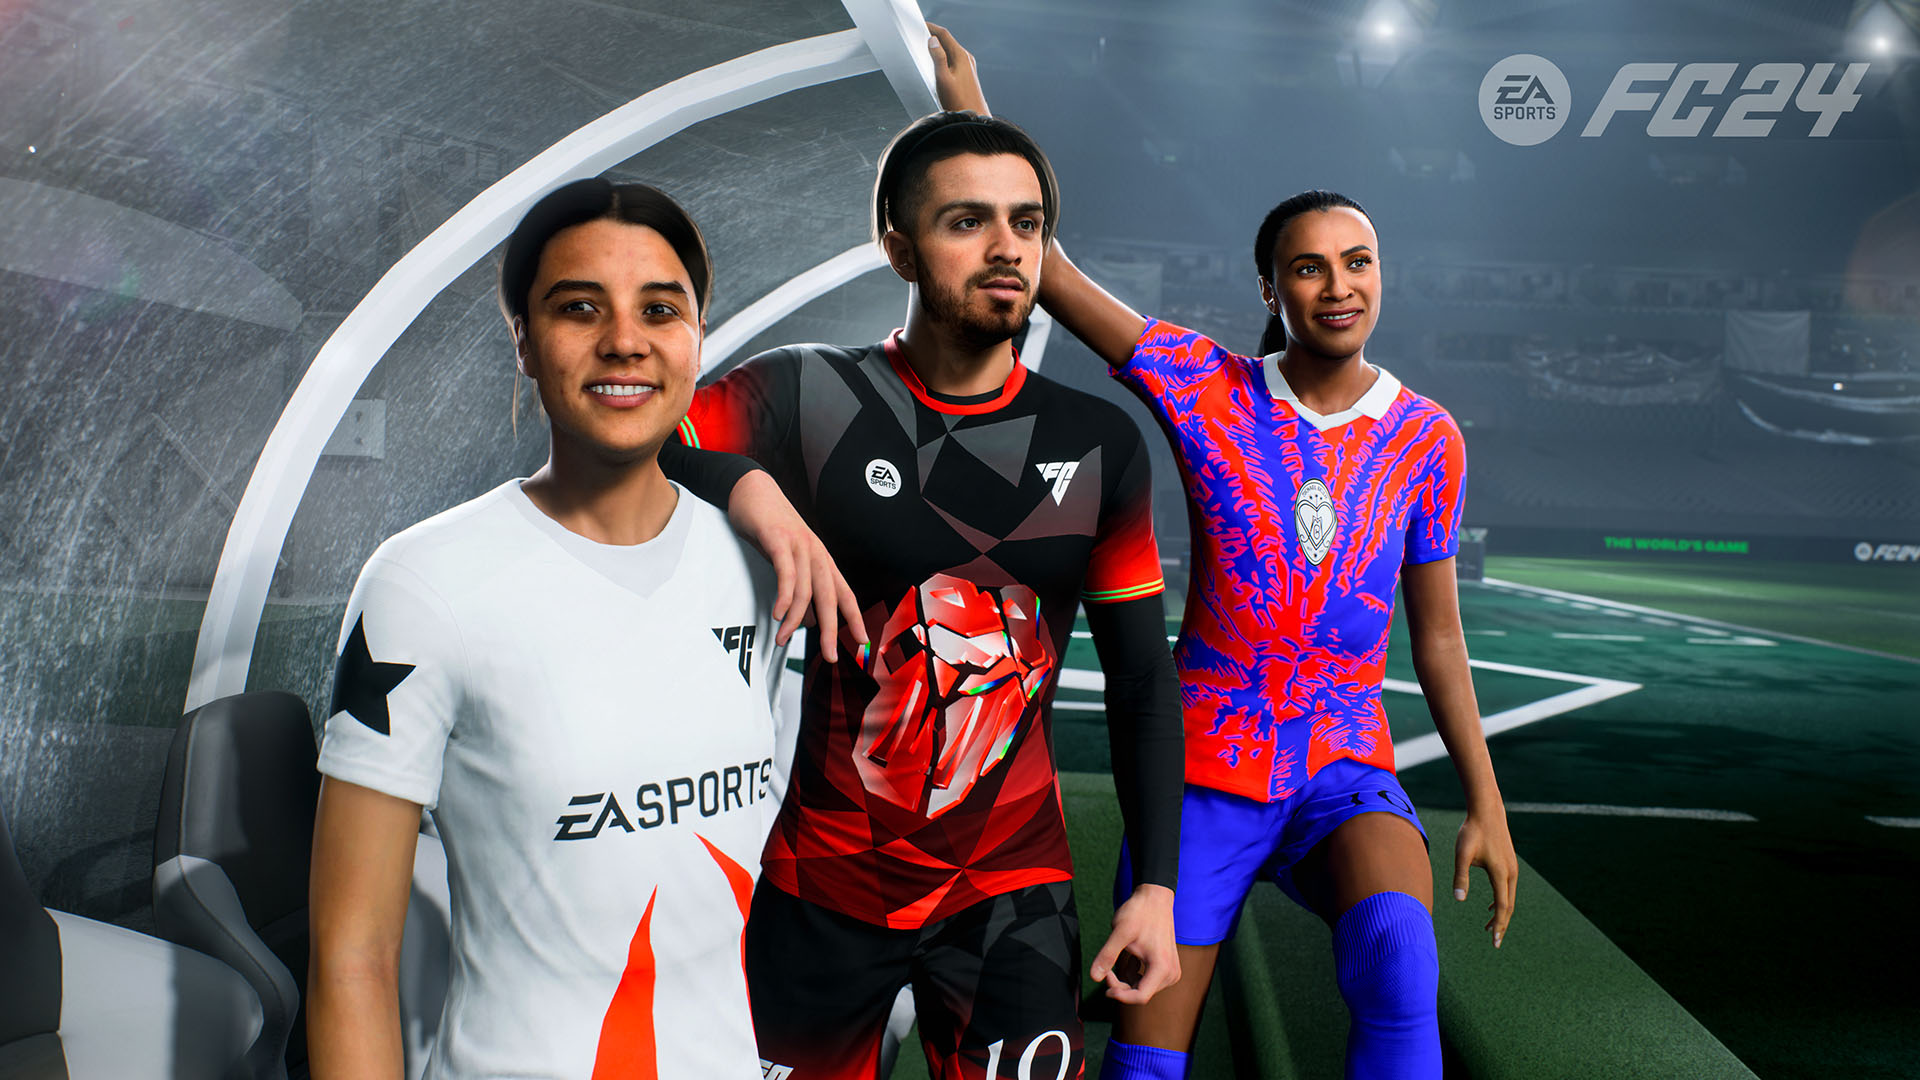 EA Sports FC 24' Is Just 'FIFA 24' in a Different Jersey